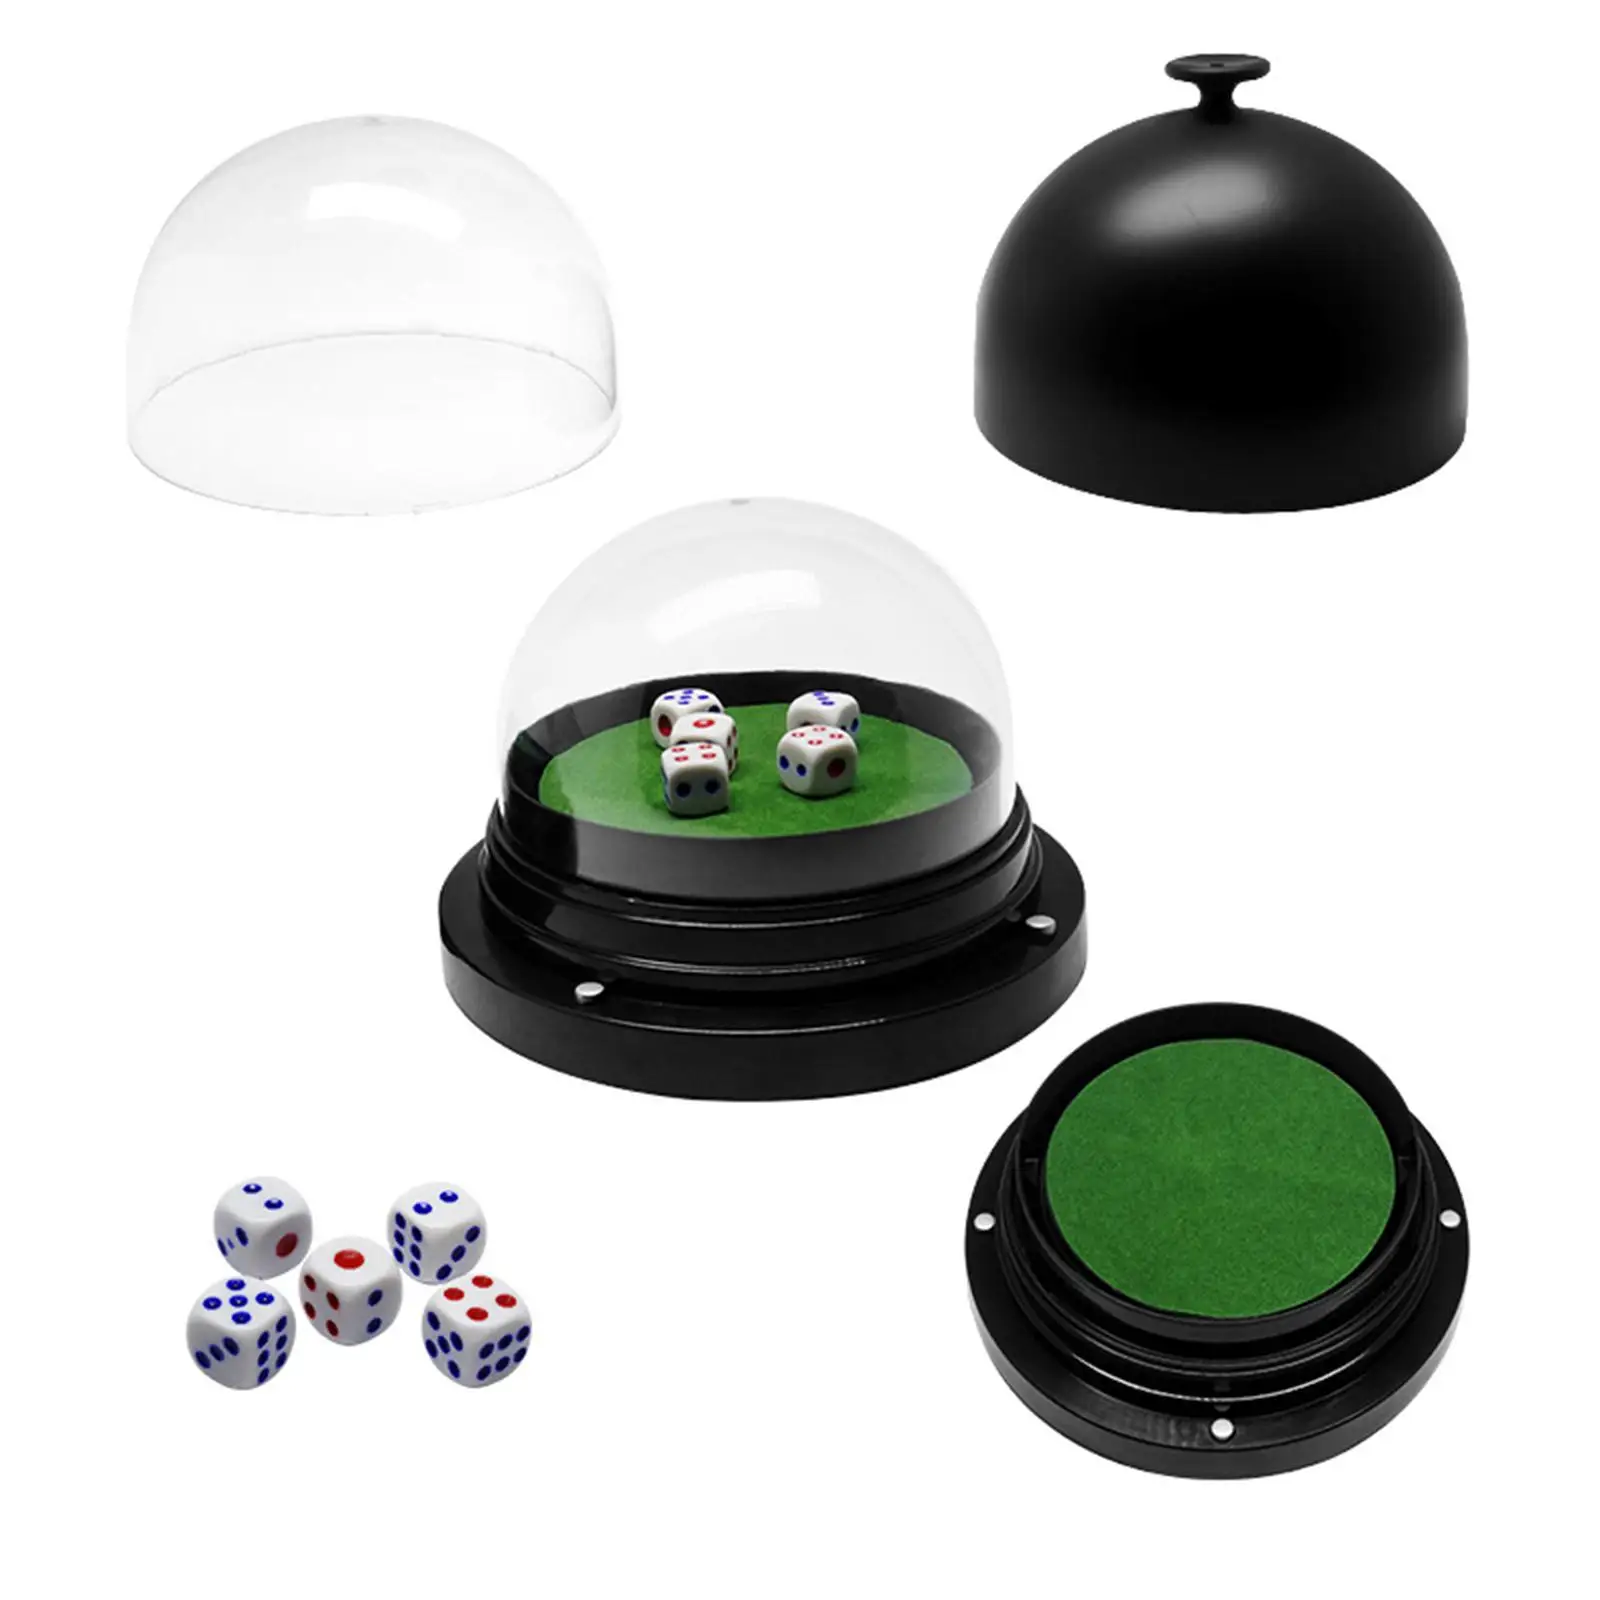 Dice Set with Dice Shaker Cup Electrical Dice Cup Bar Game Container Holder Dices for Entertainment KTV Hotel Travel Holiday